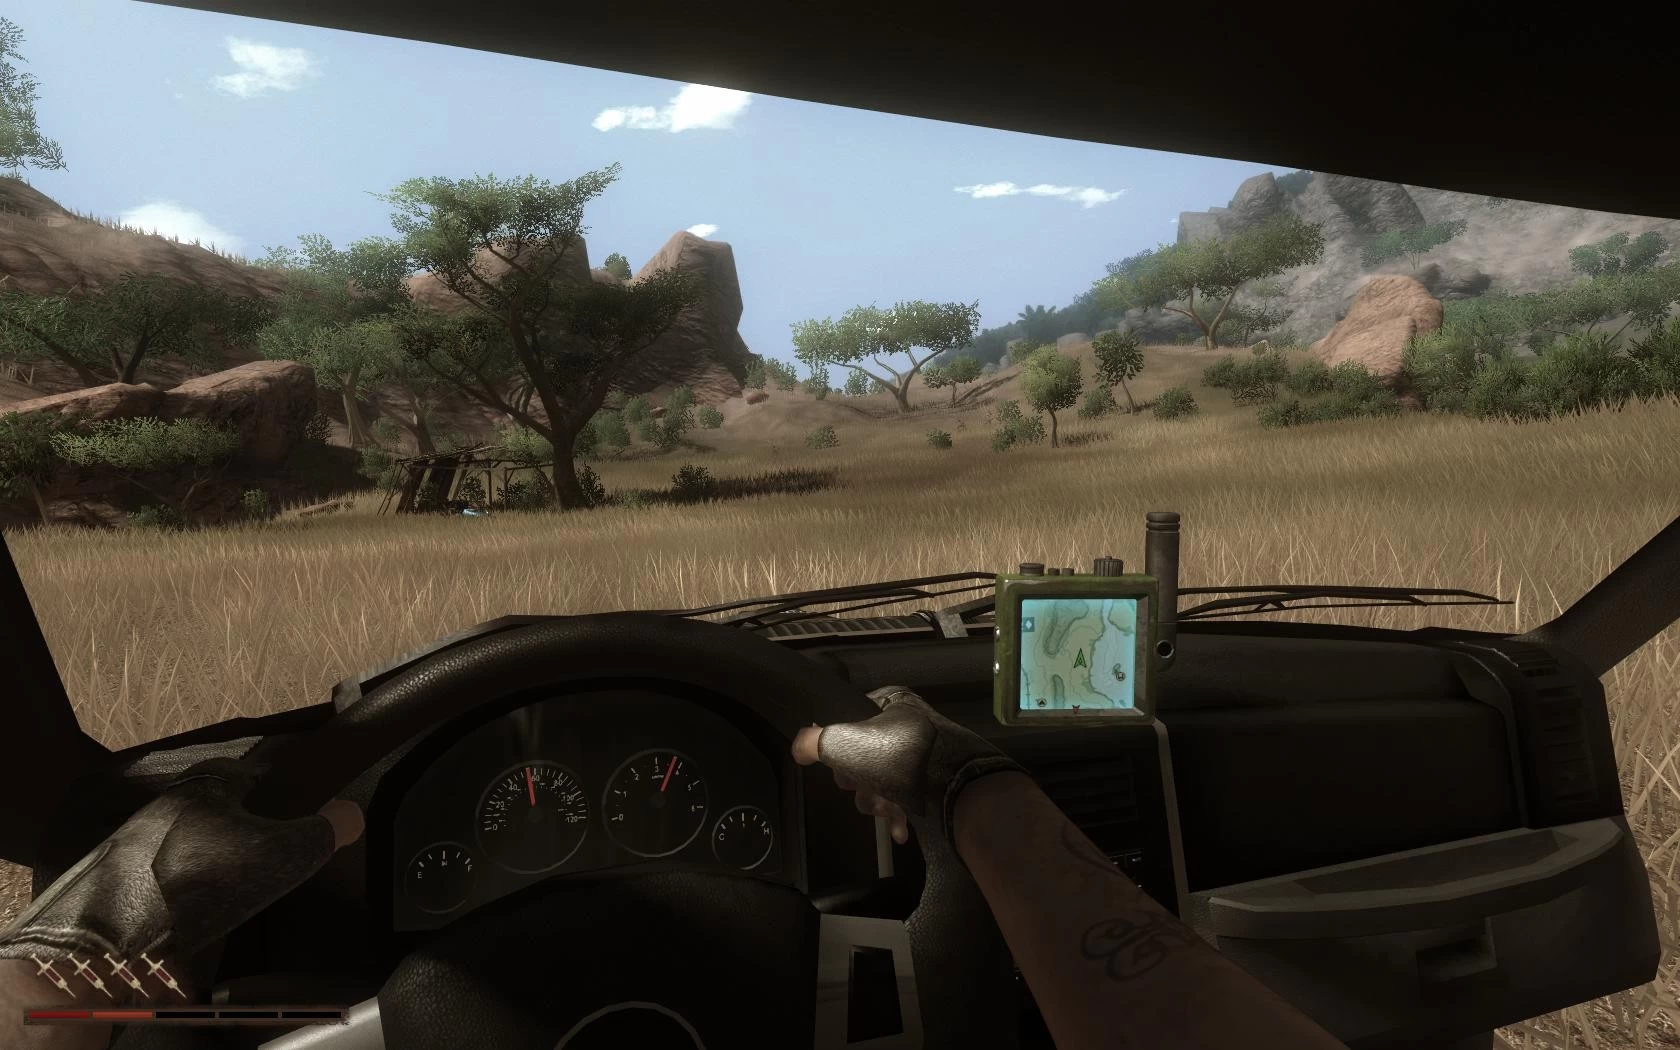 Far Cry 2 relaxation ride [Far Cry 2] [Mods]